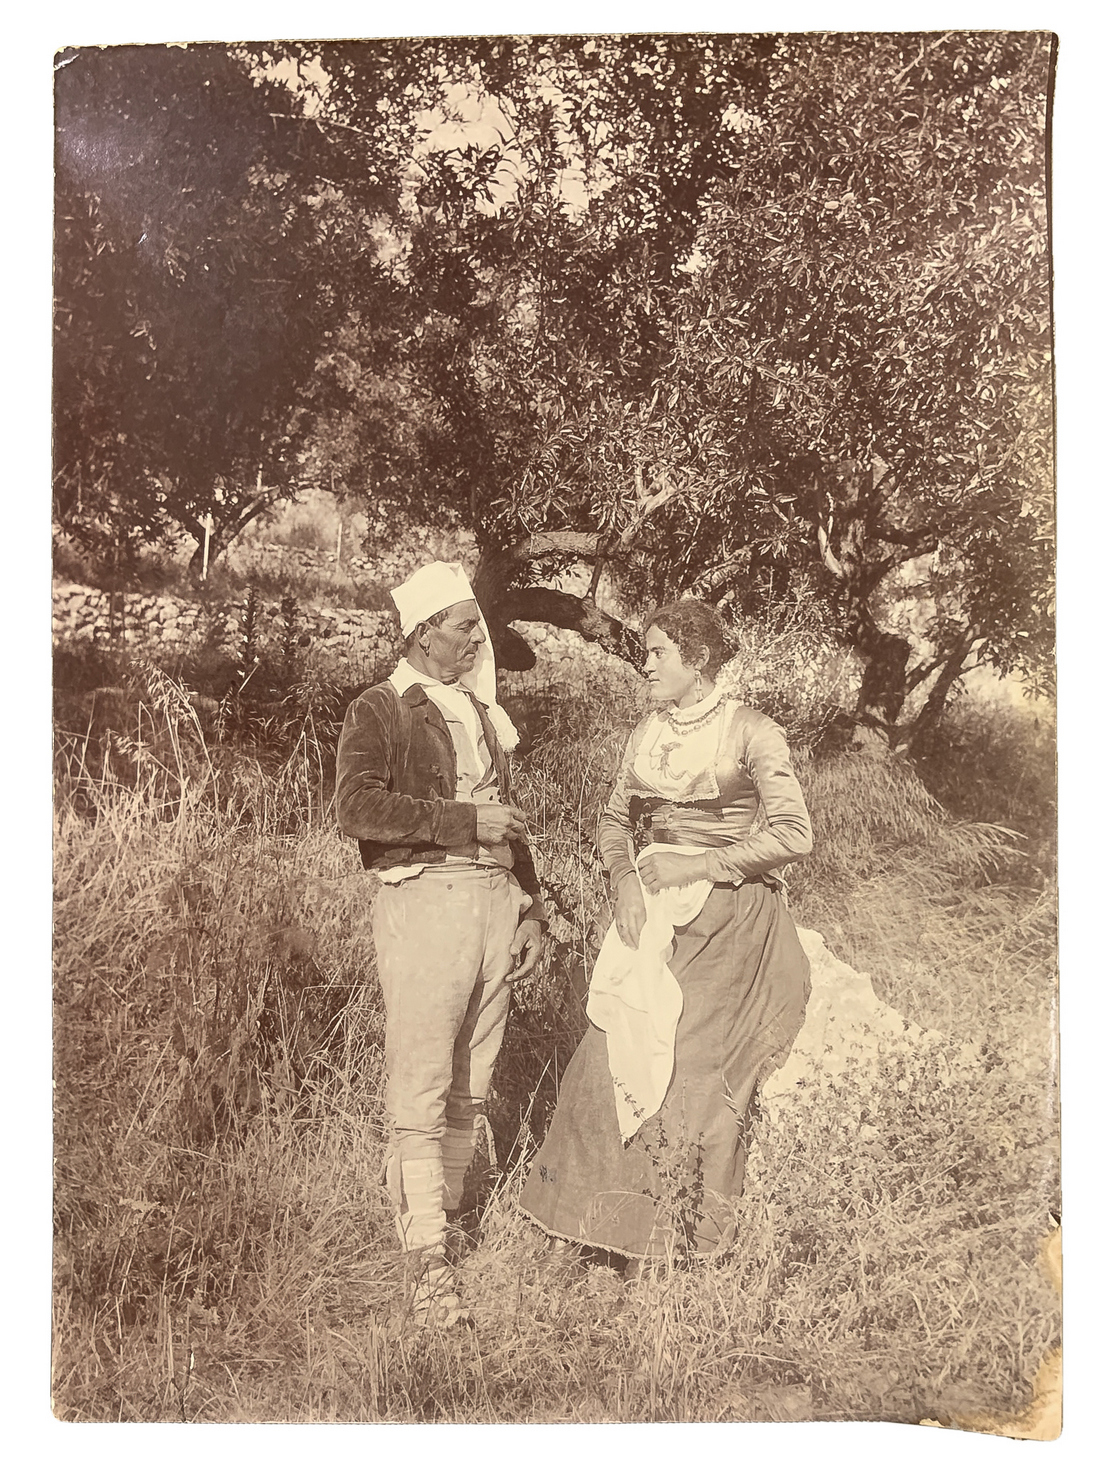 Wilhelm von Gloeden (1856-1931), albumin photos depicting pair of characters in an olive grove in Ta